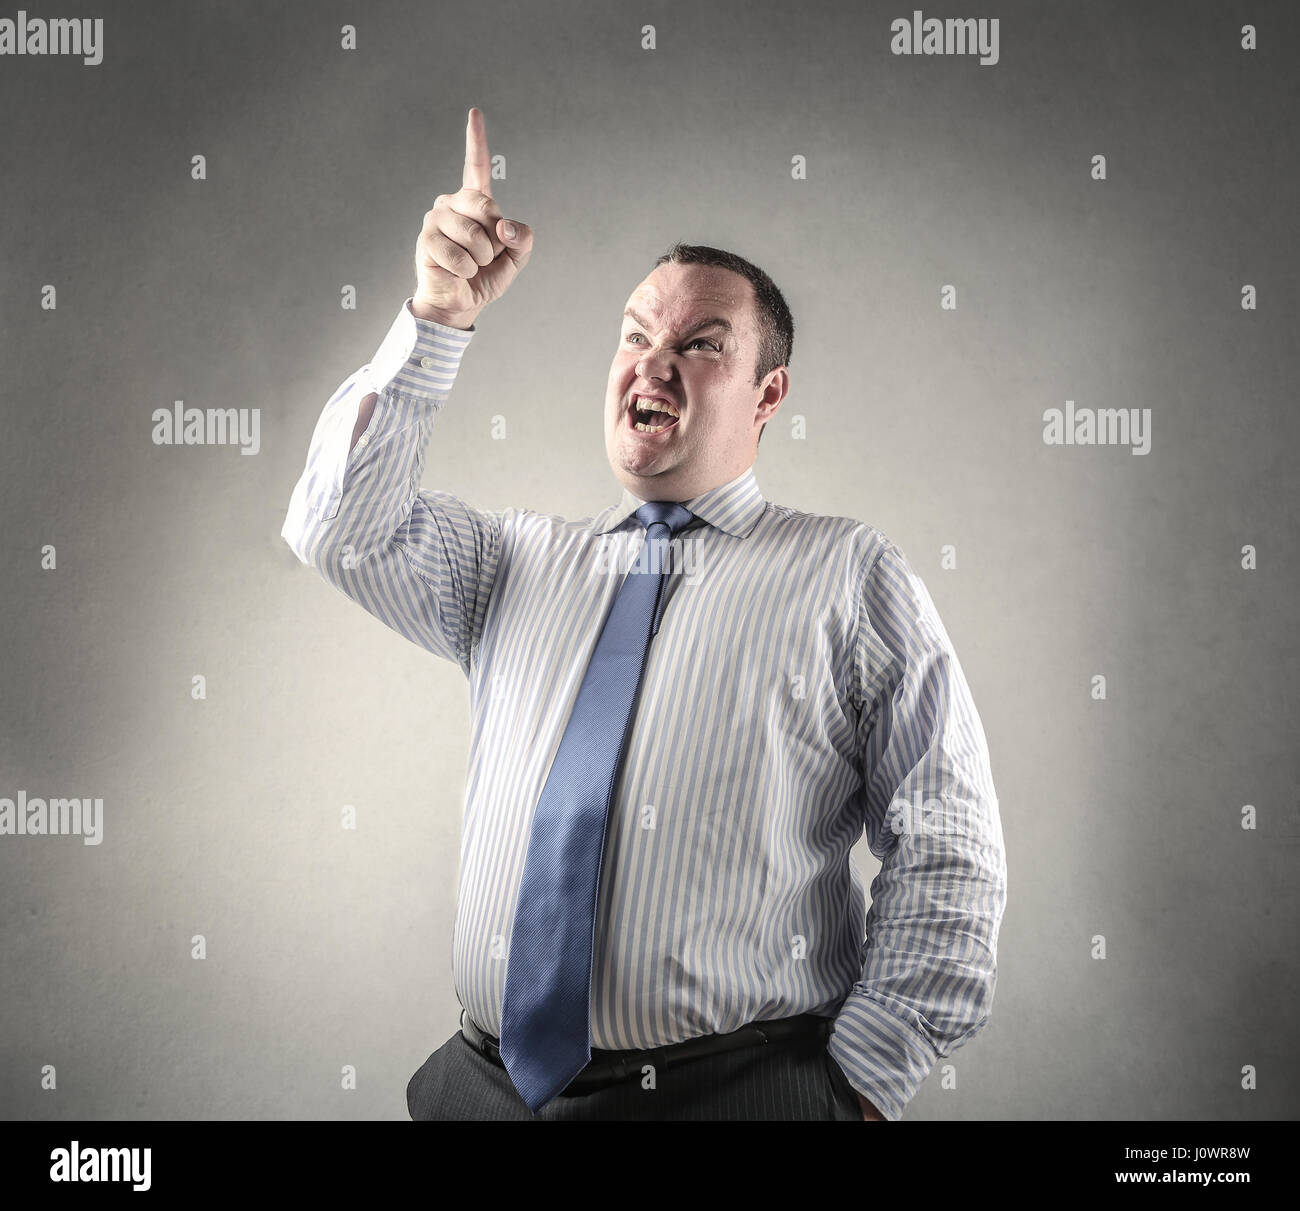 Businessman yelling and pointing upside Stock Photo